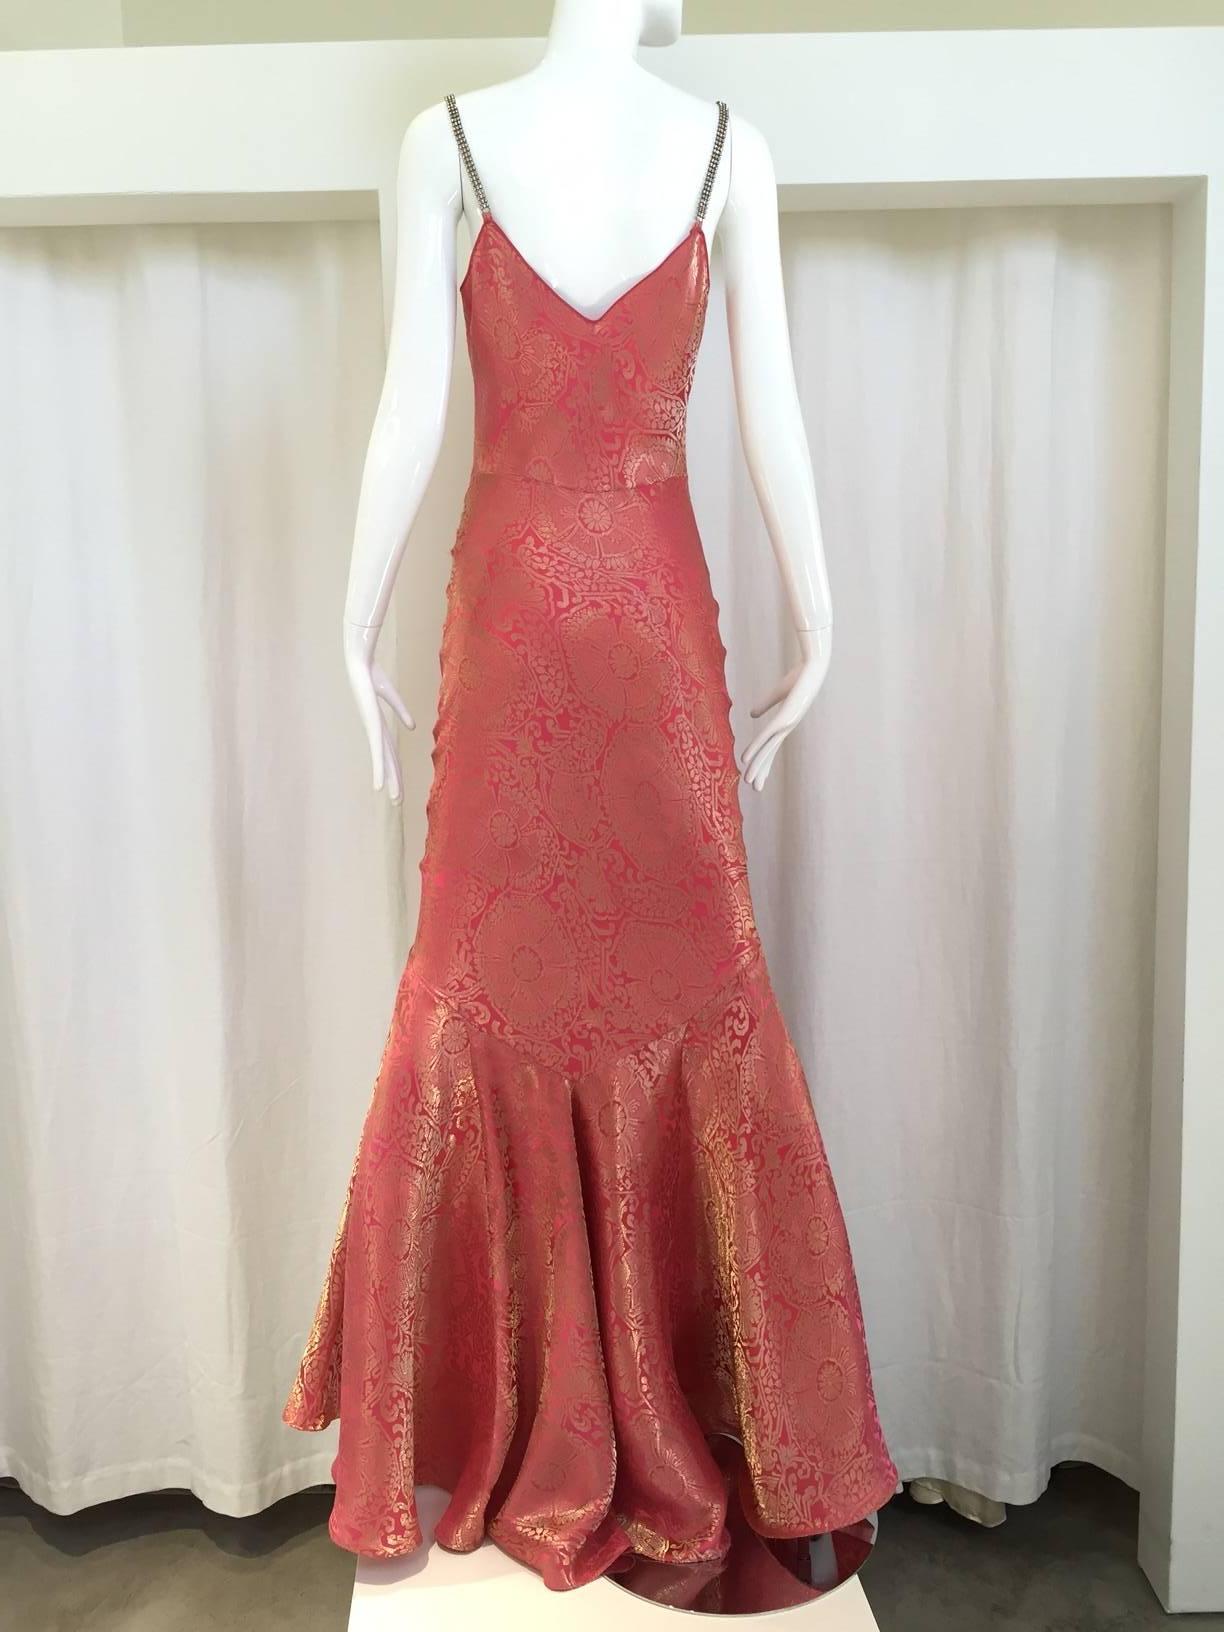 Beautiful John Galliano 2000s  bias cut rose and gold metallic silk jacquard gown inspired by 1930s style. Perfect for Black Tie event or unconventional wedding dress.
 Rhinestones straps. Marked 40 F/ SIZE 6 US / Medium
Bust: 35